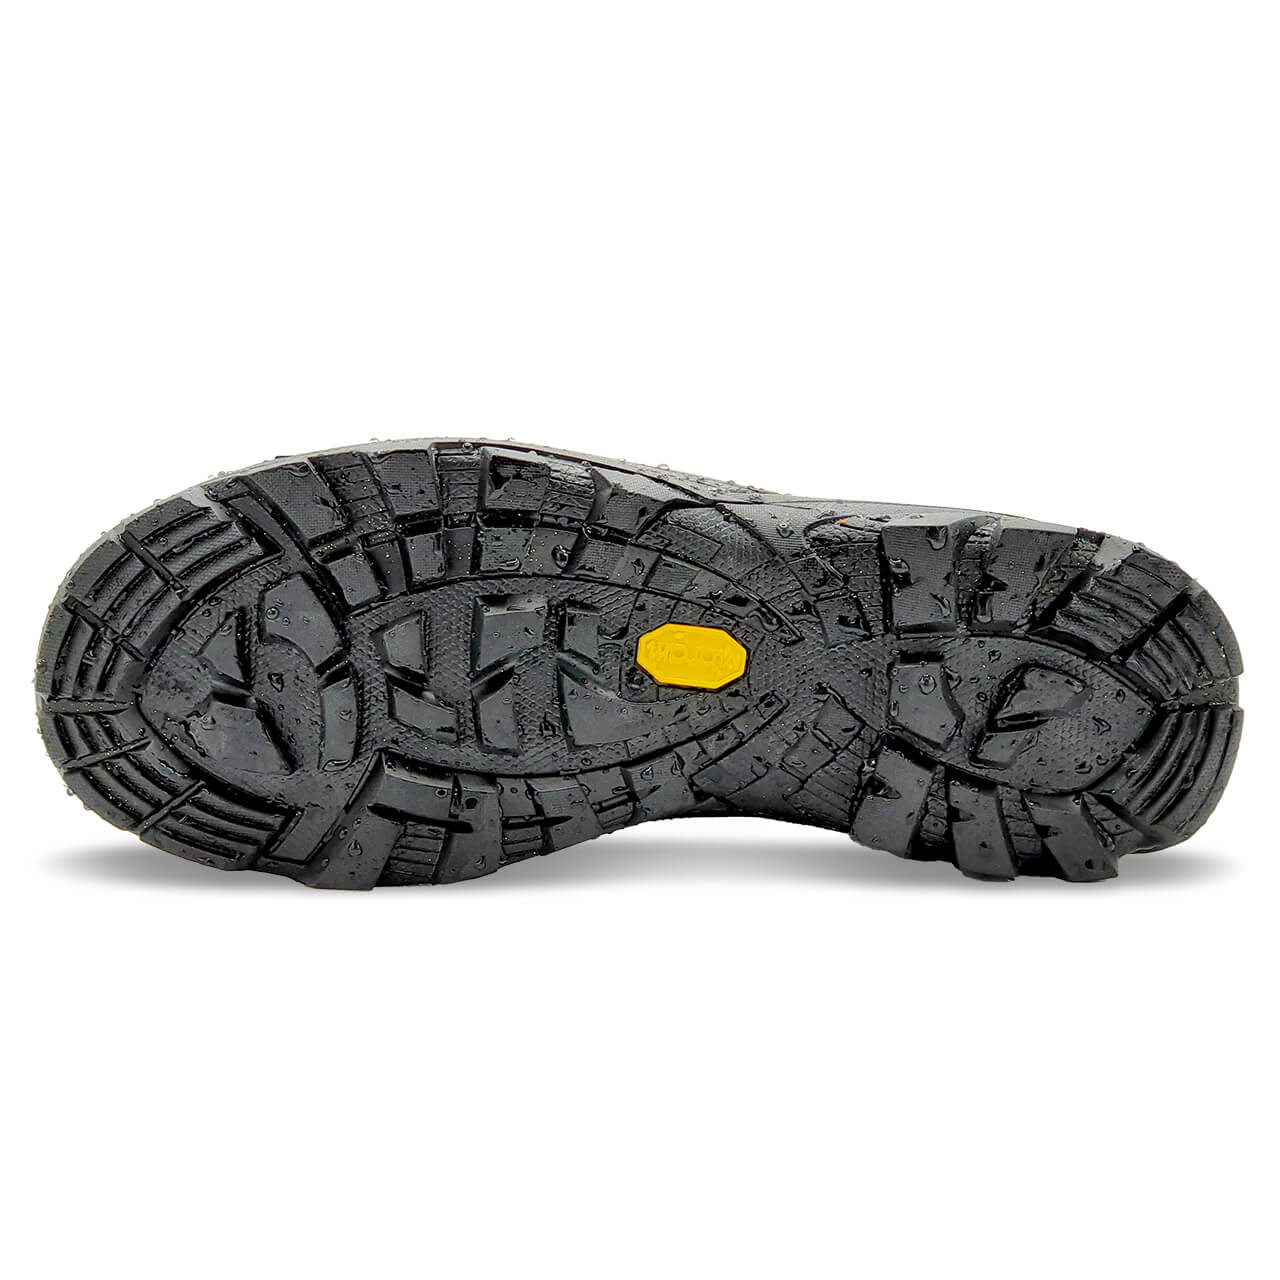 ANATOM Q2 Classic Comfort Hiking Boots with Vibram outsole.